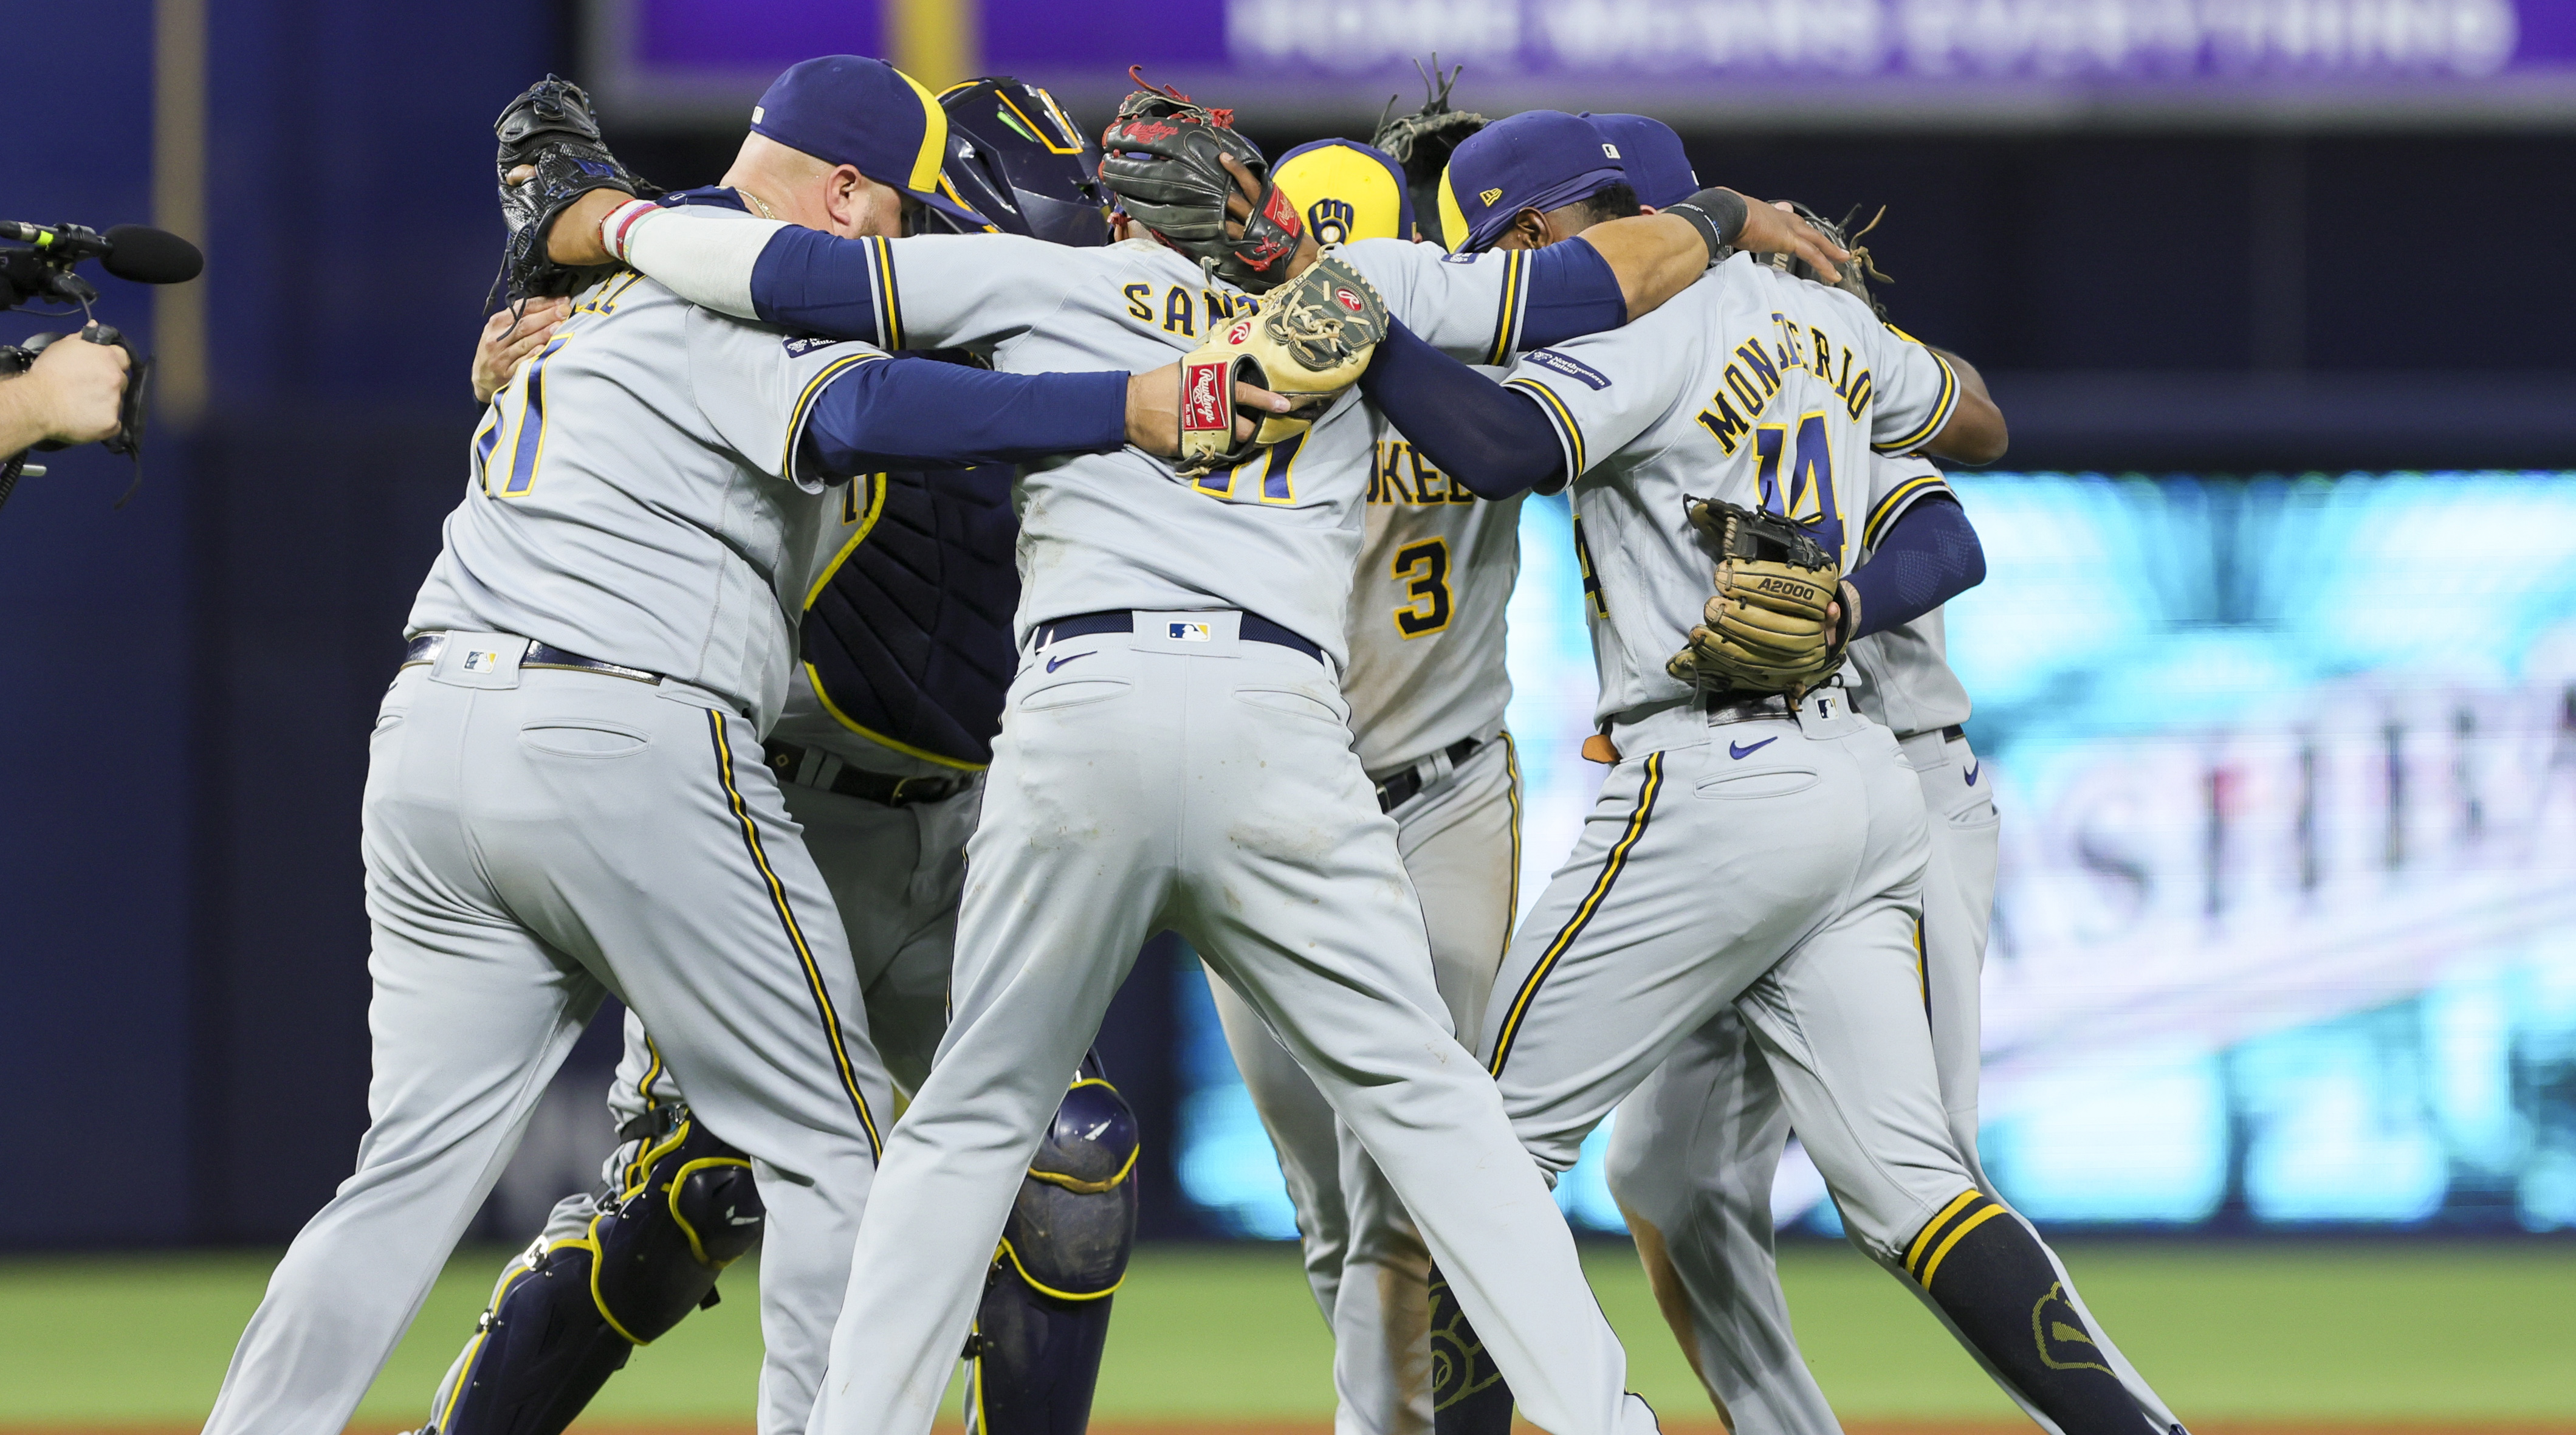 Milwaukee Brewers a part of rare playoff history first seen in 2023